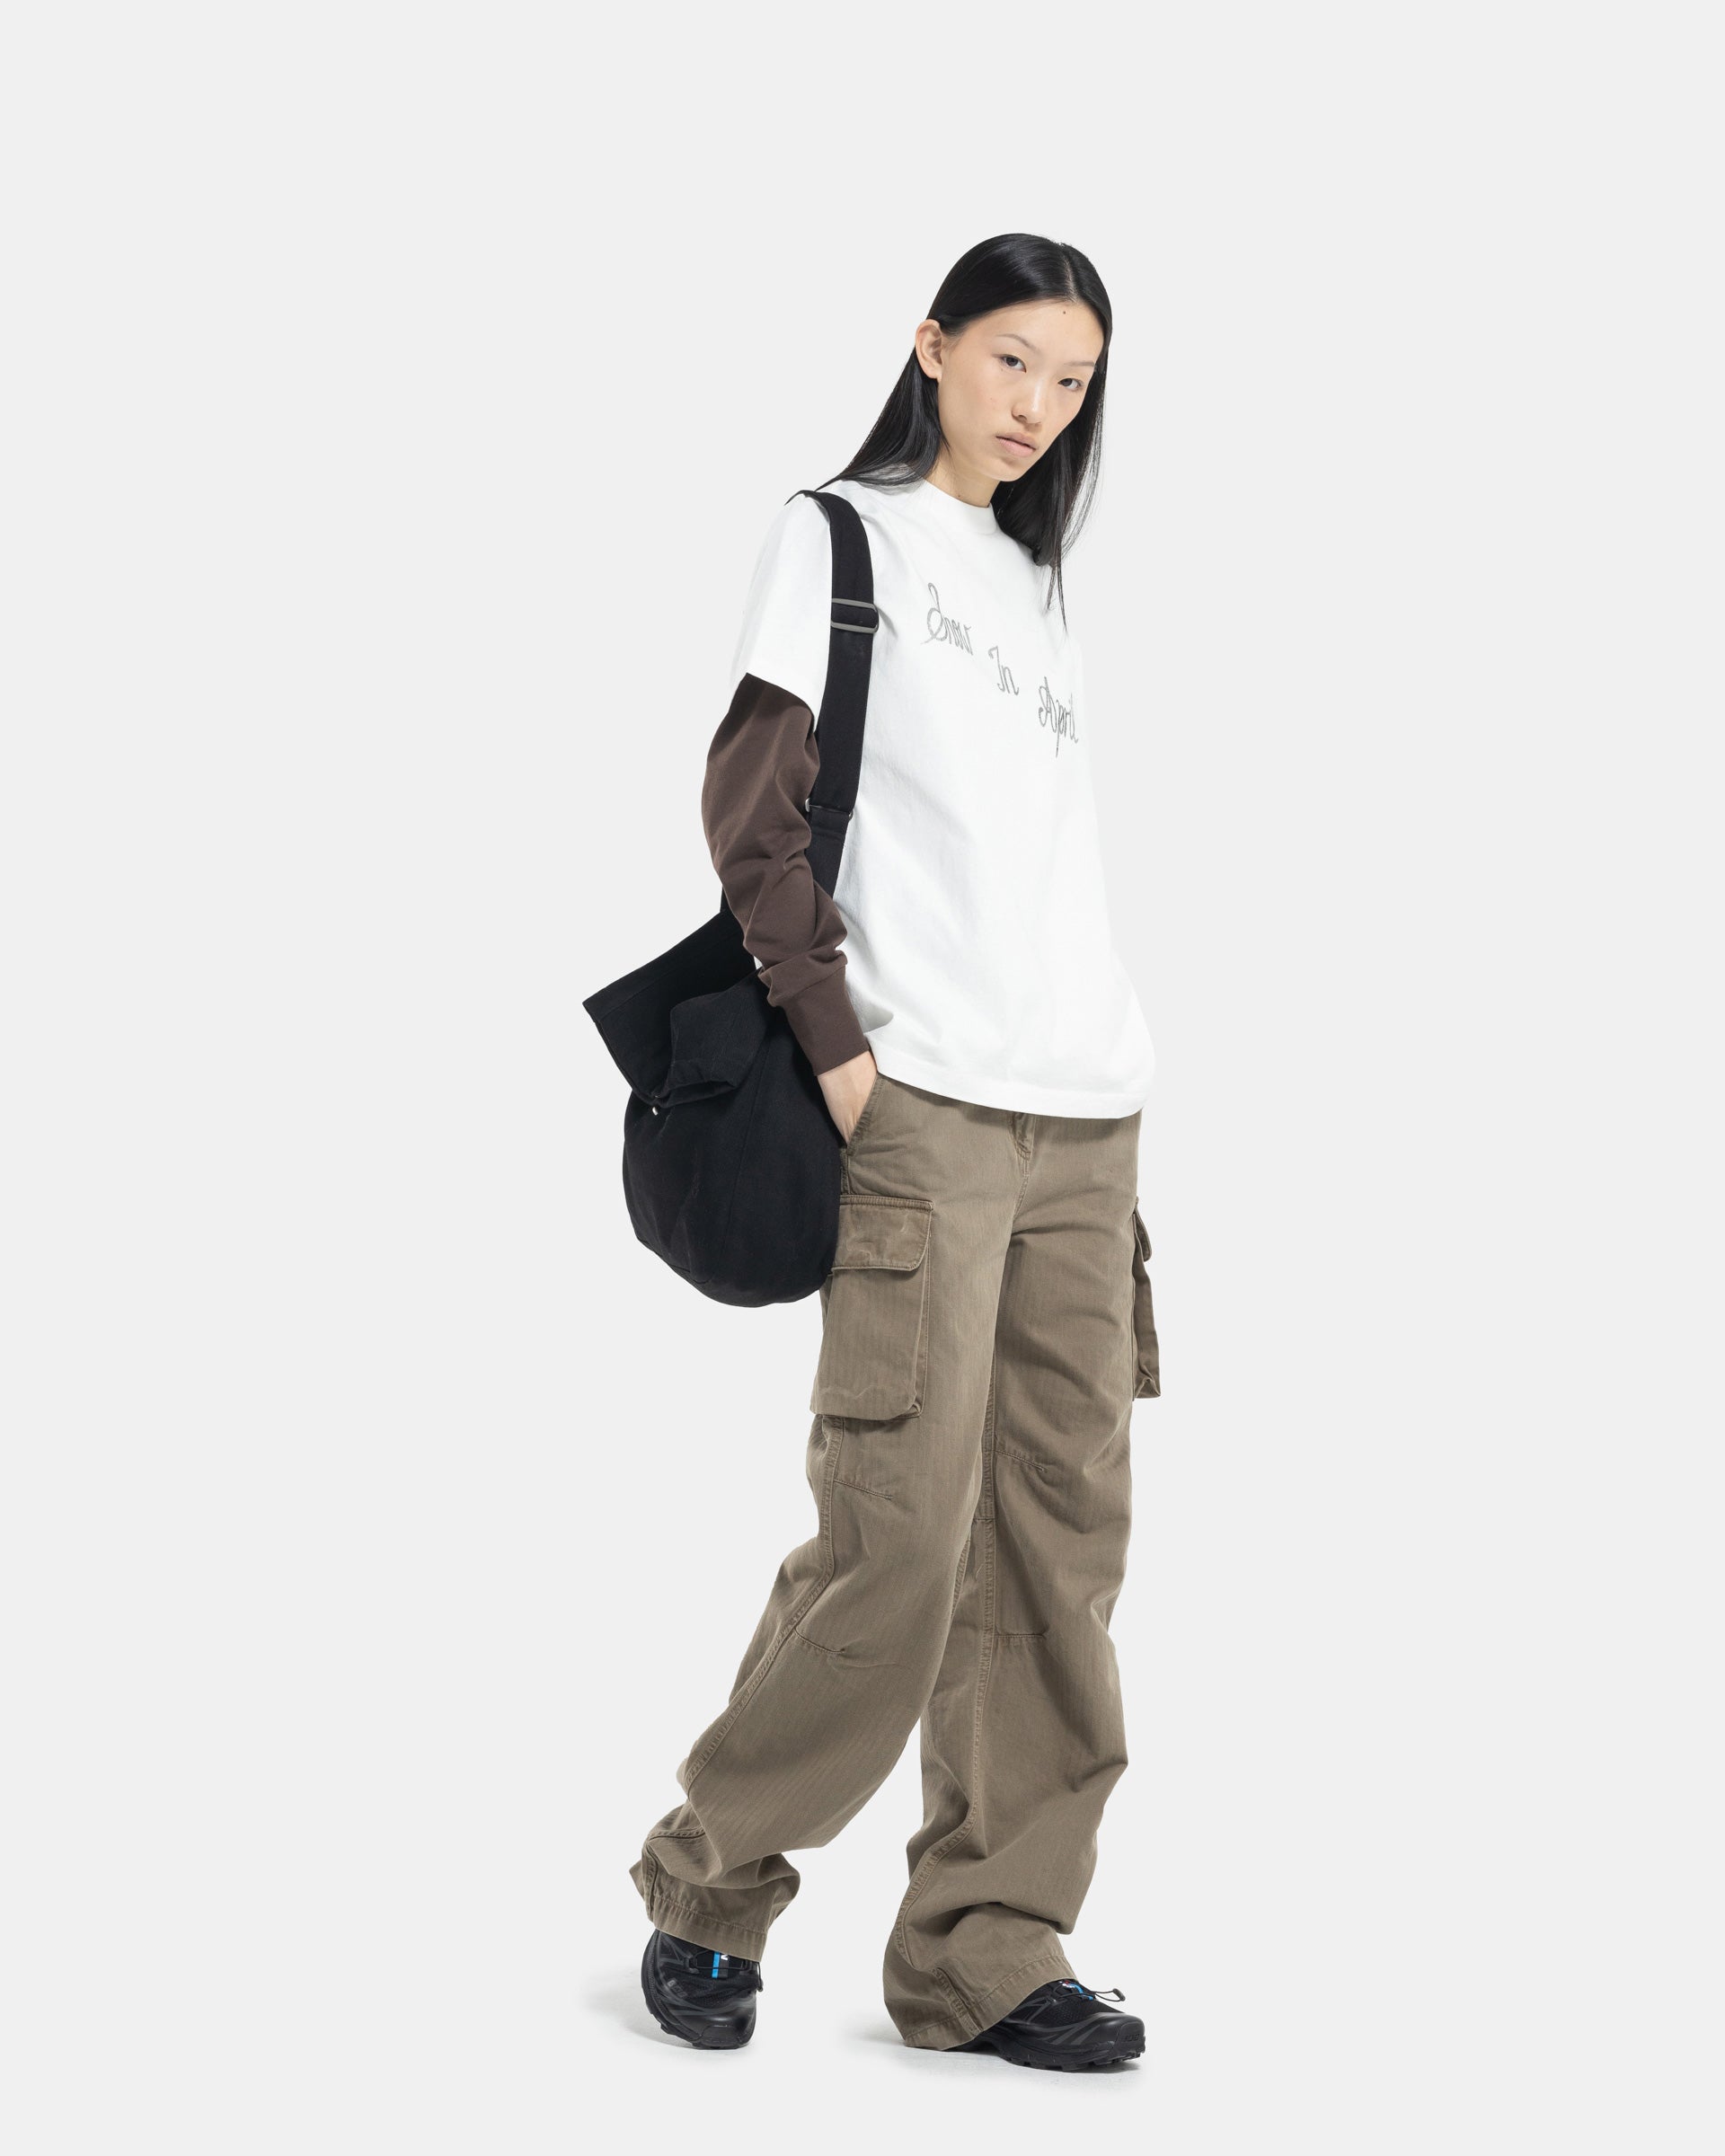 Female model wearing Khaki Cargo Pant from Our Legacy on white background